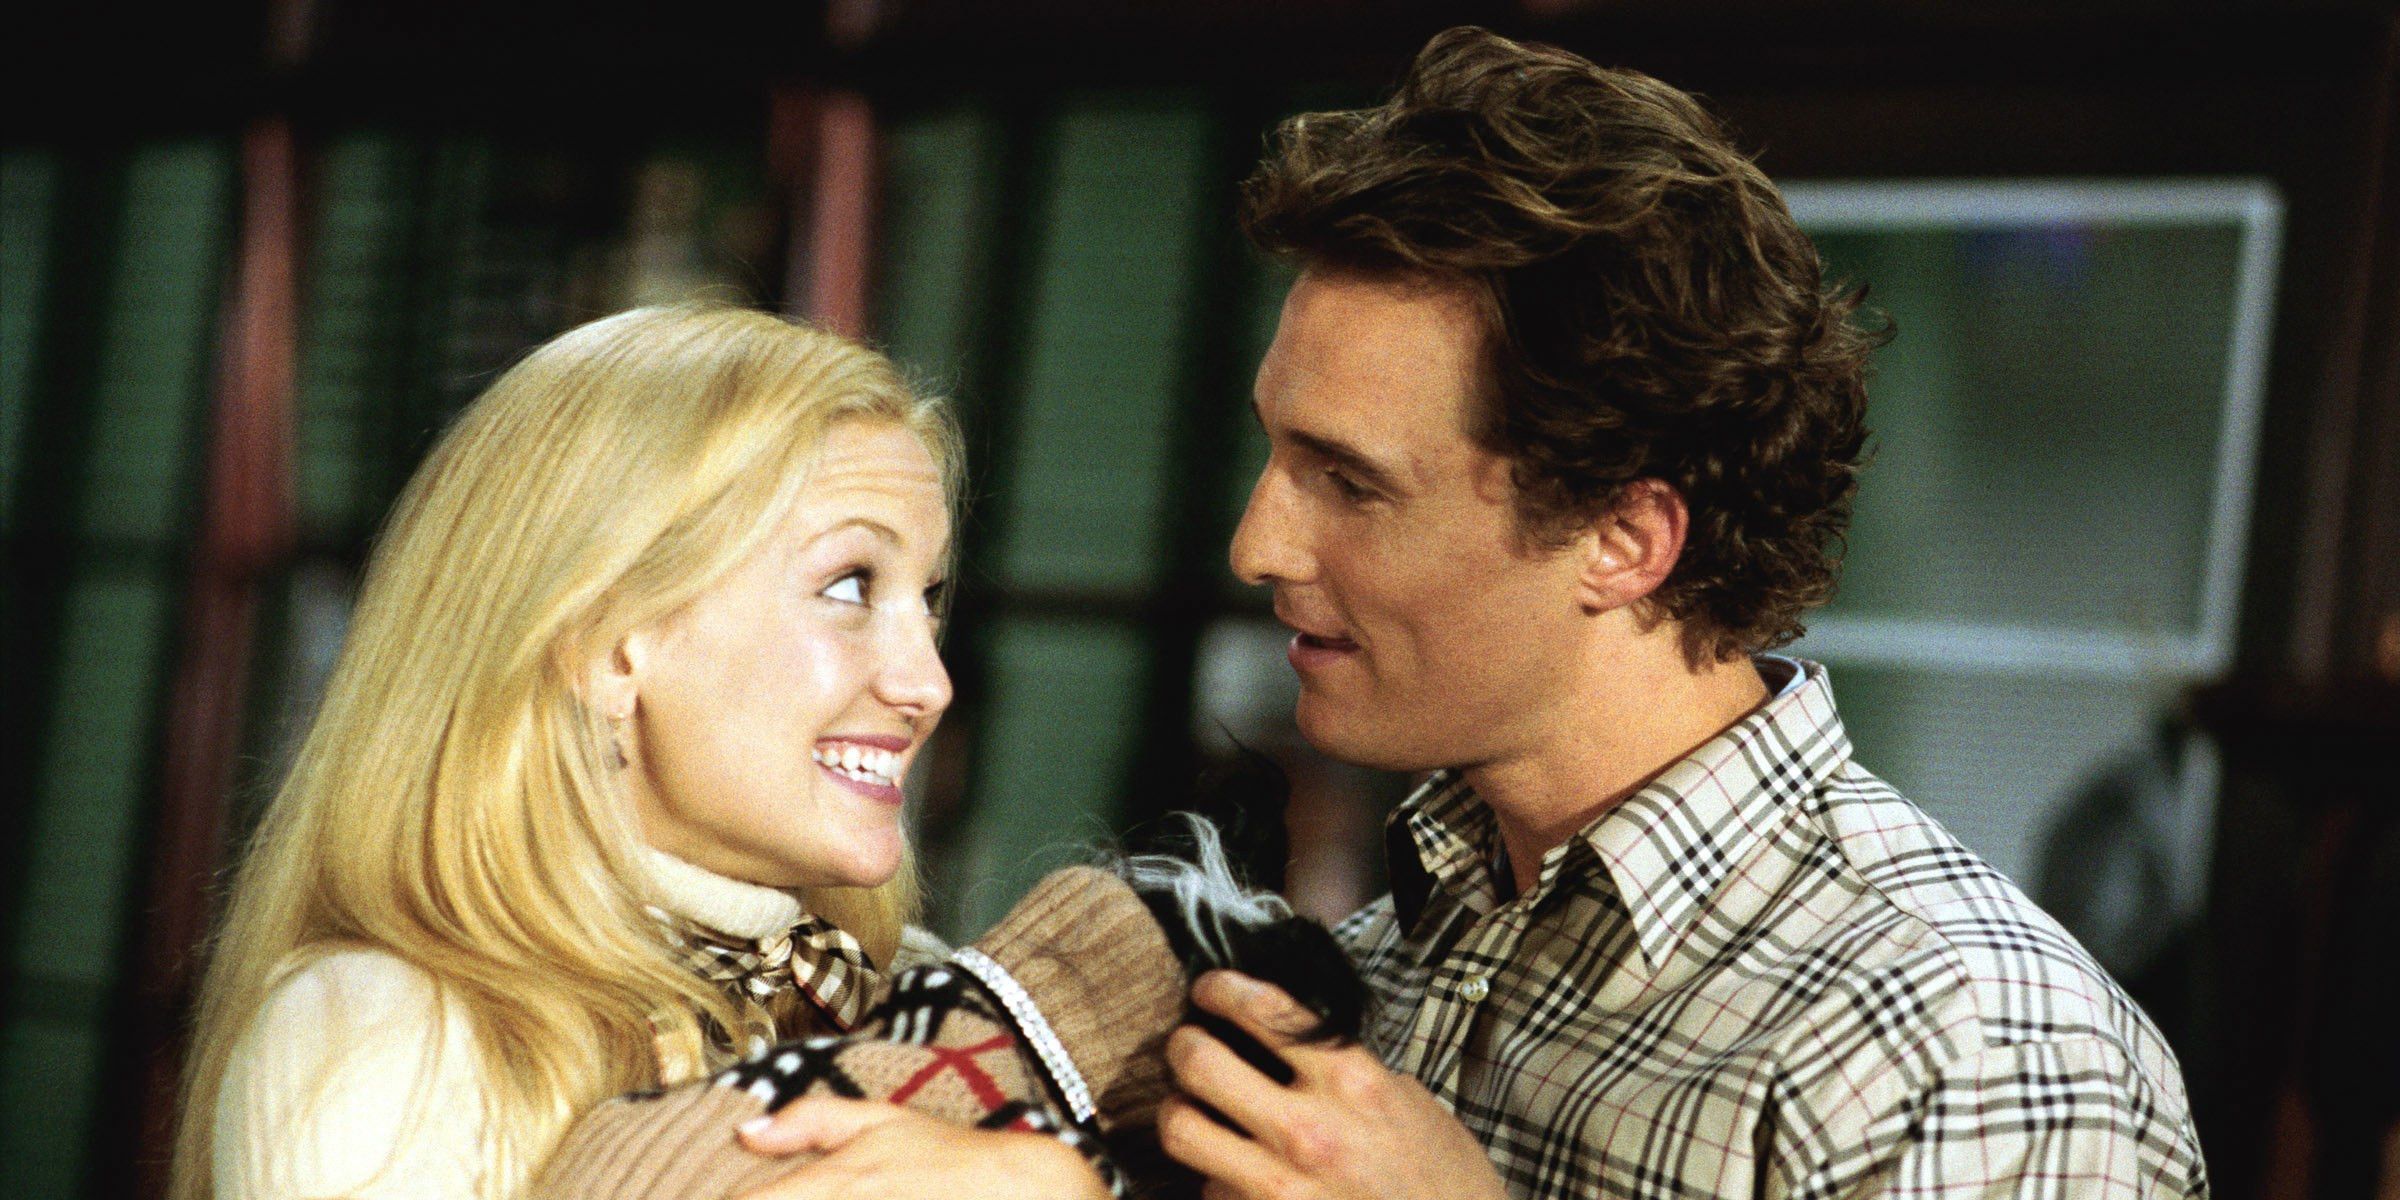 Kate Hudson and Matthew Maconoughey in How To Lose A Guy In 10 Dates